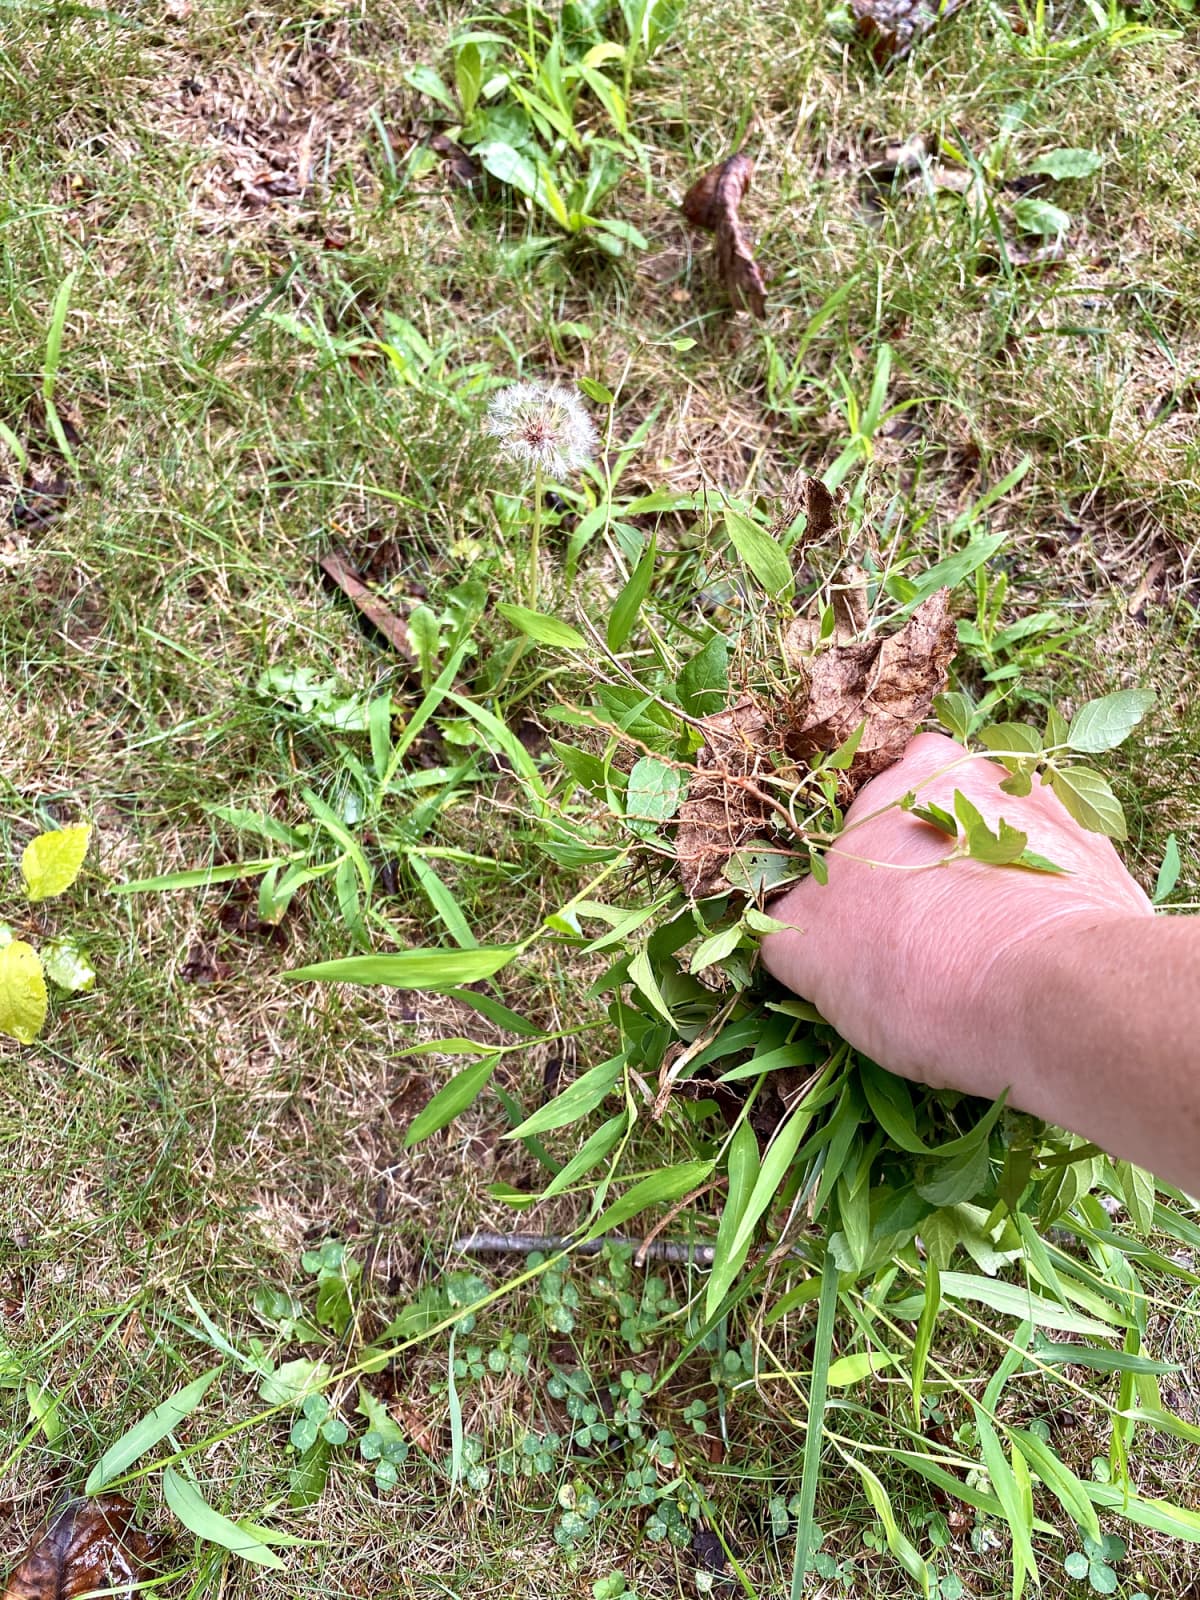 A hand pulling weeds from grassy area